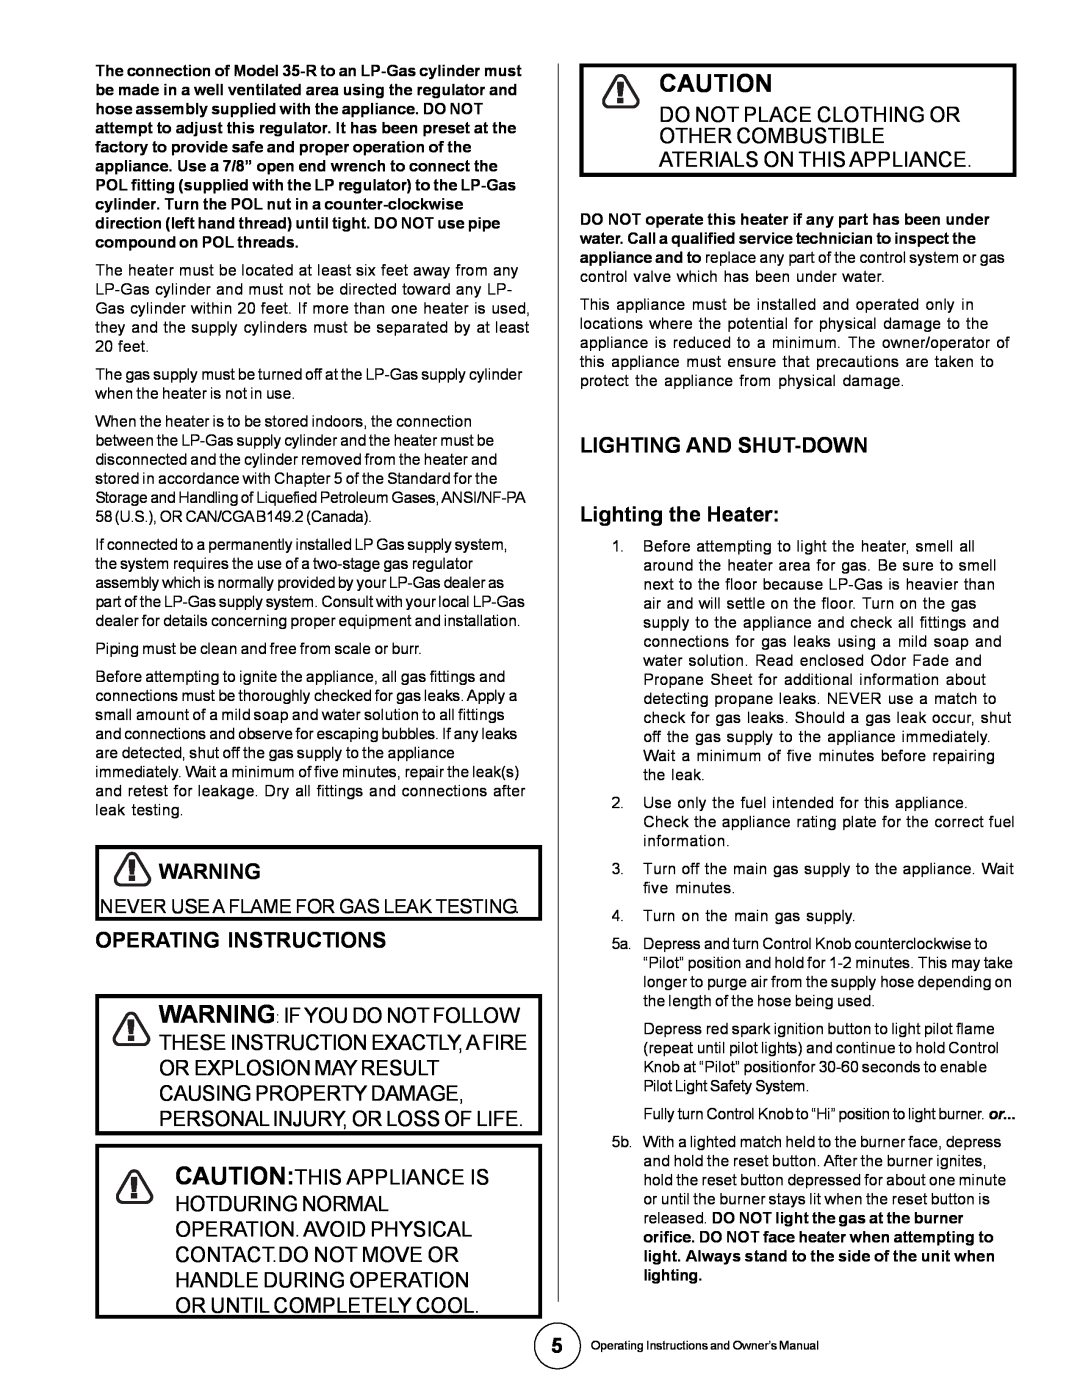 Universal 35-R owner manual Operating Instructions, Caution This Appliance Is Hotduring Normal, Aterials On This Appliance 